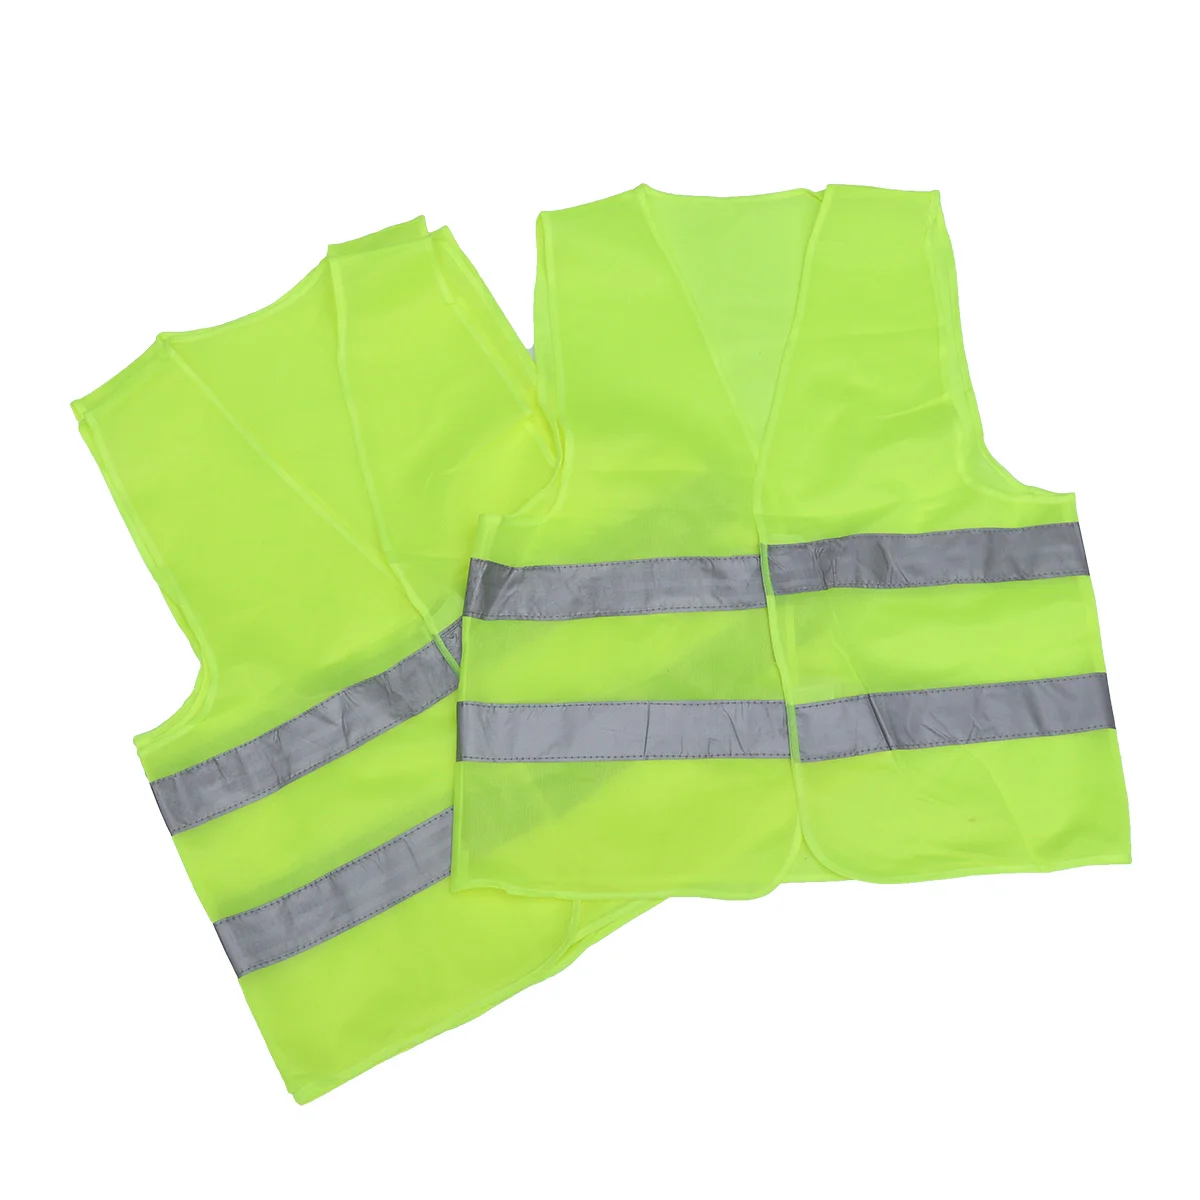 

4 PCS High Visibility Cycling Riding Vests Reflective Safety Vests Jackets for Outdoor Construction Work Safety Road Working